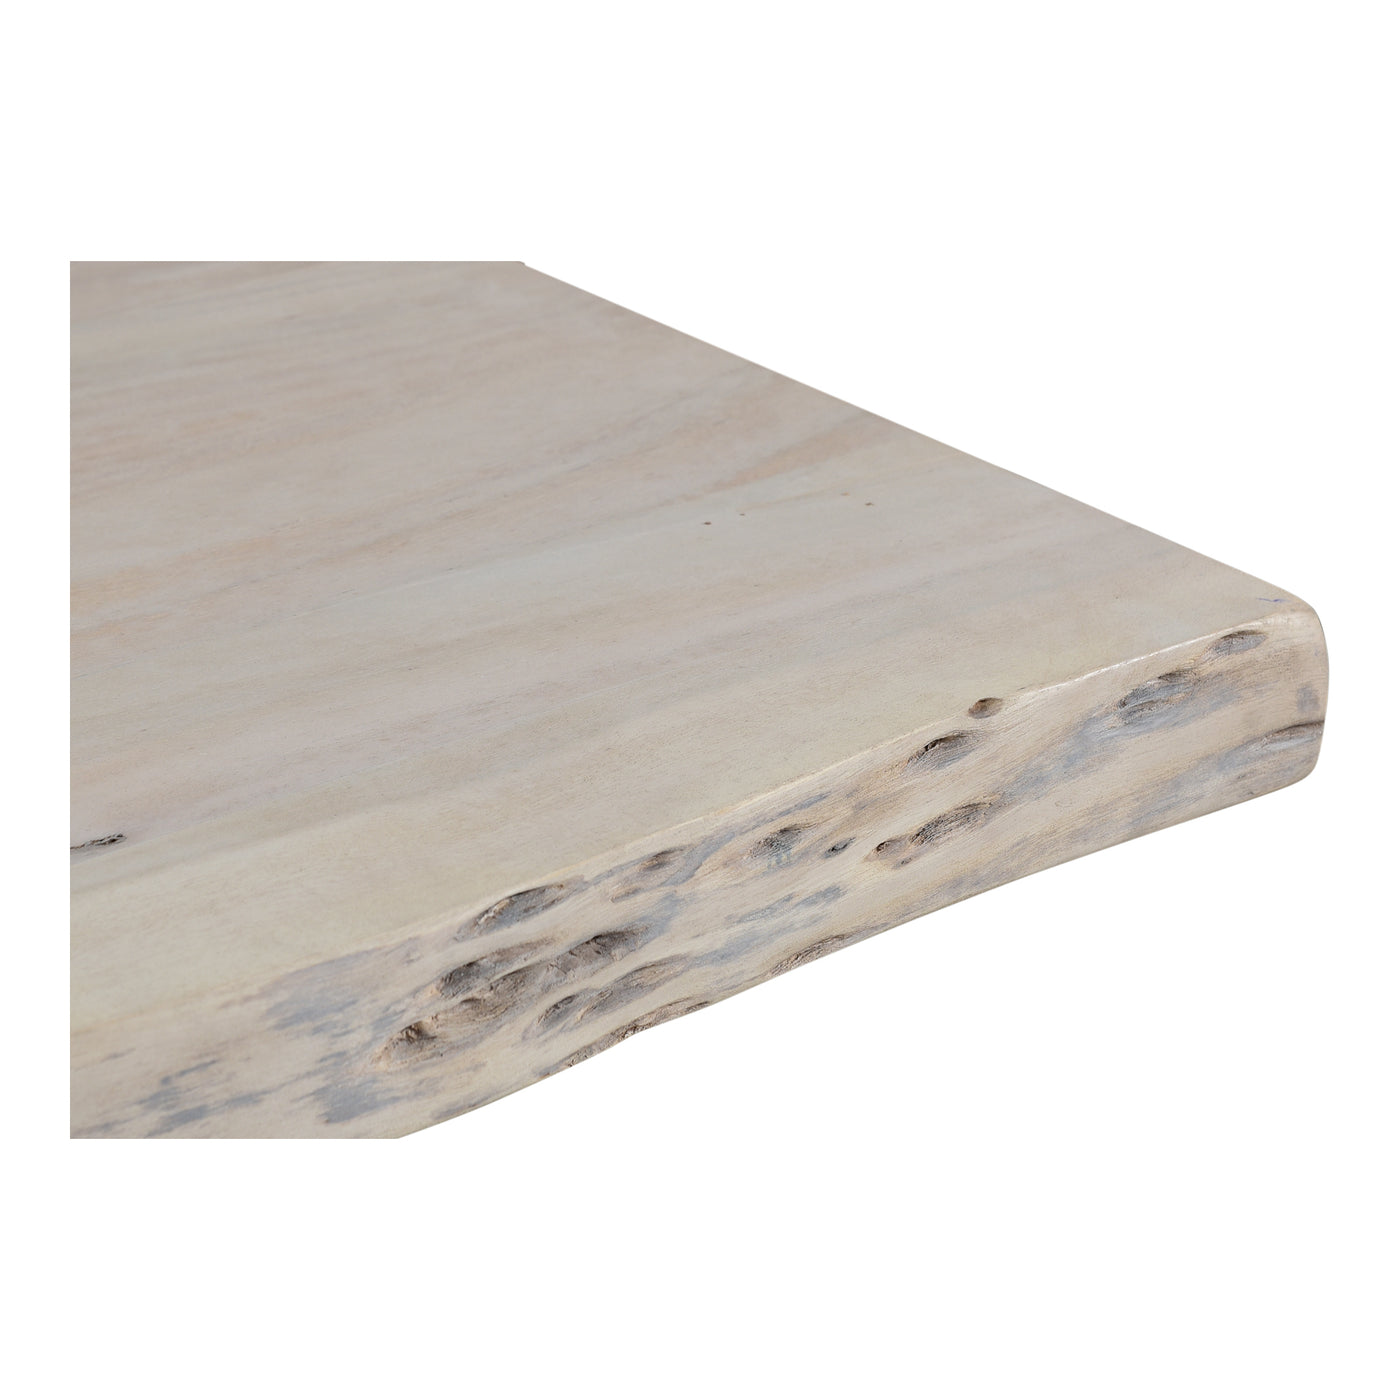 With a live edge, the Evans Dining Table is the center of the fun. Made with a white washed solid acacia wood and dark iro...